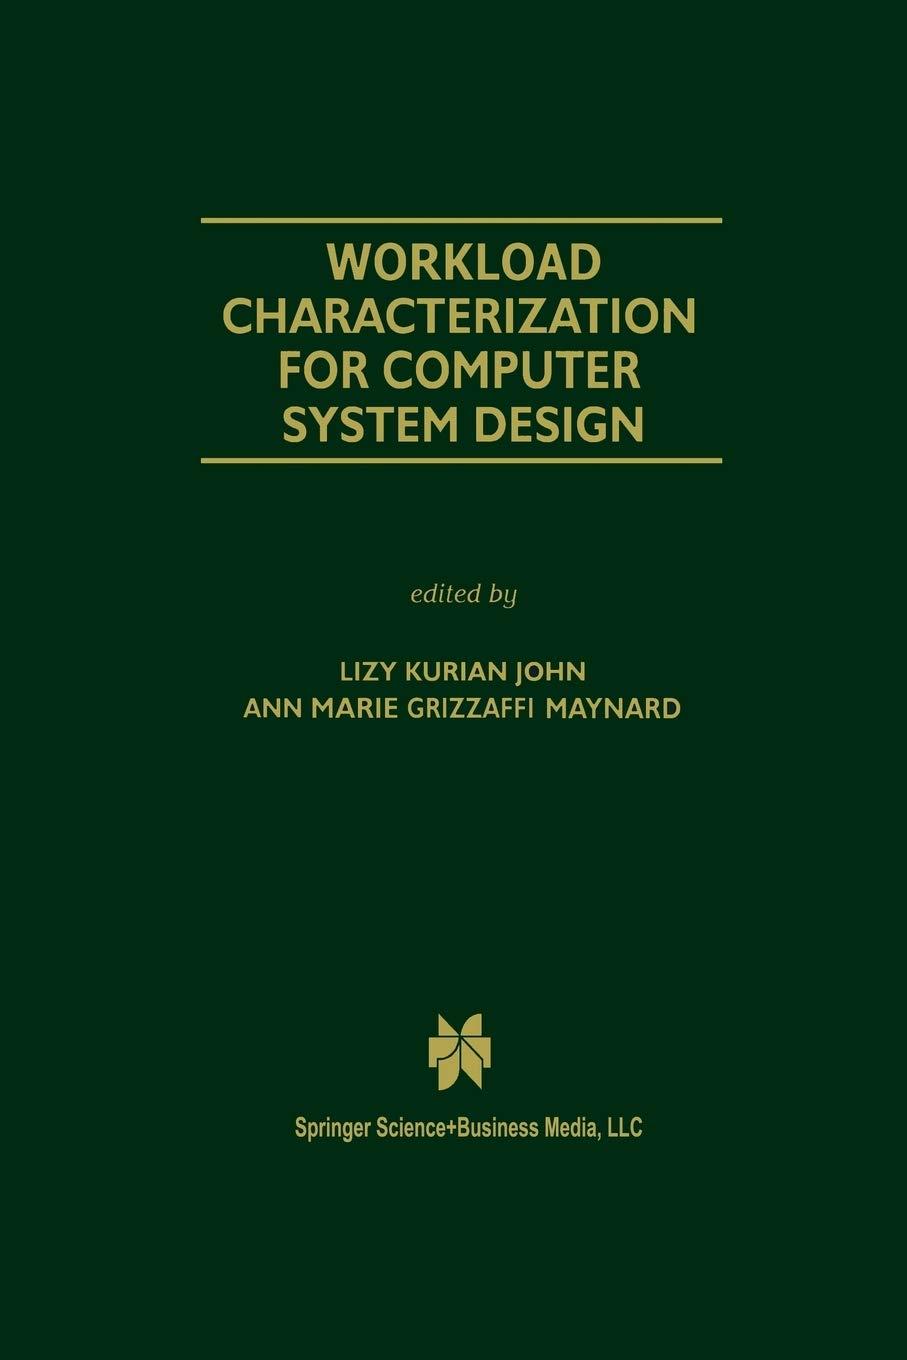 workload characterization for computer system design 2000 edition lizy kurian john, ann marie grizzaffi